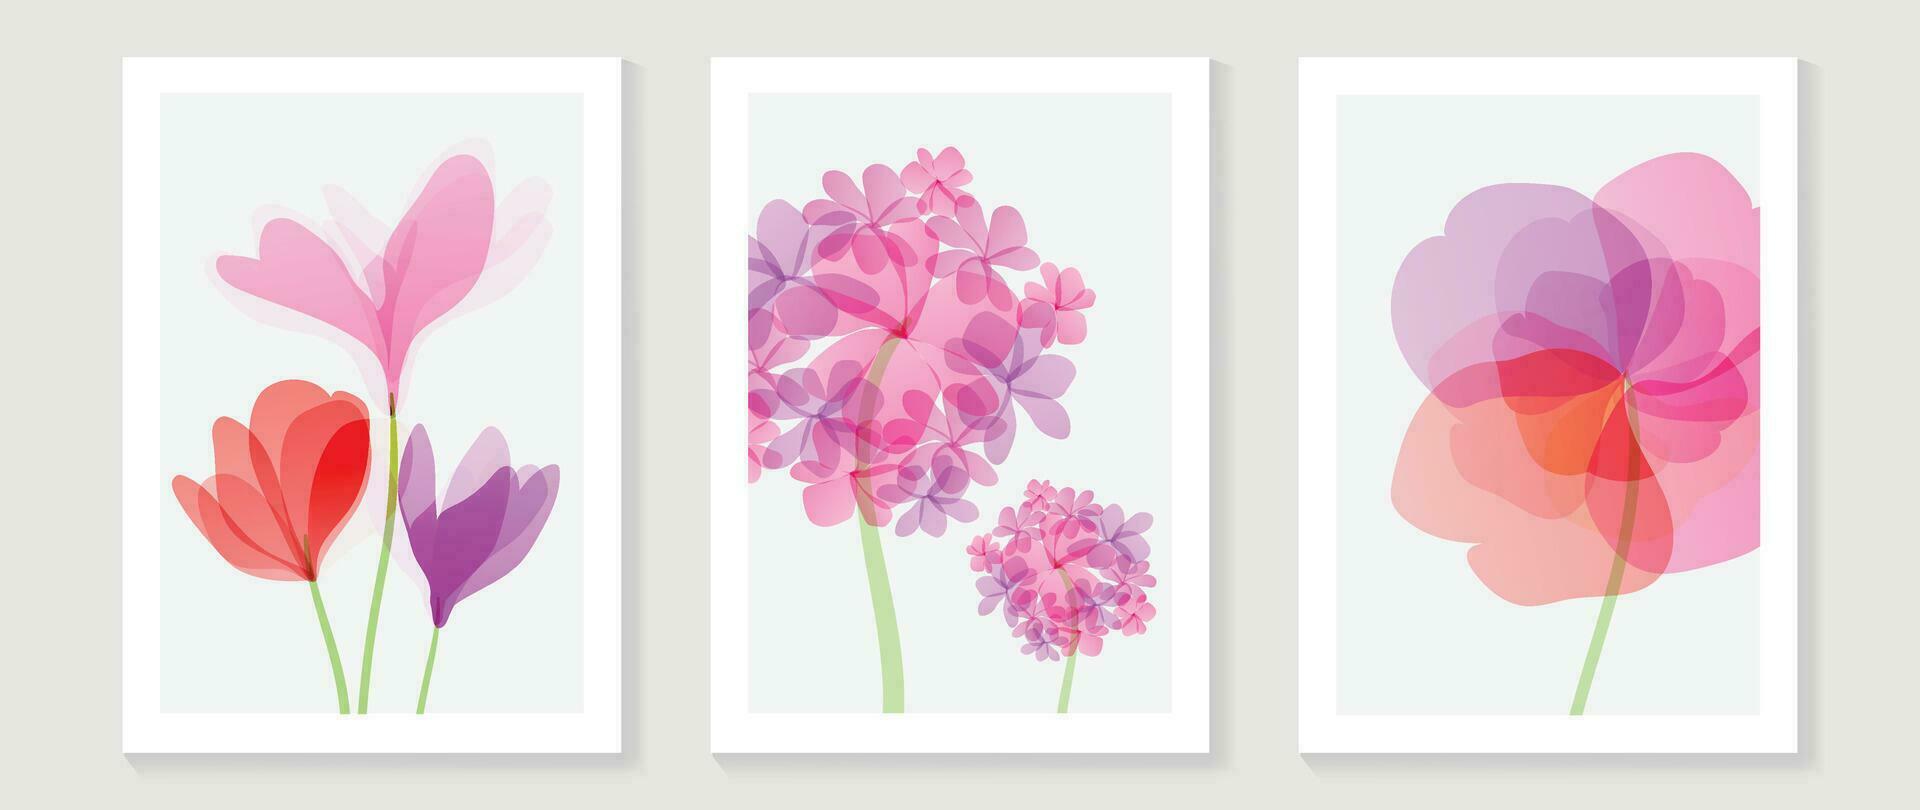 Abstract floral wall art template. Set of botanical hand drawn